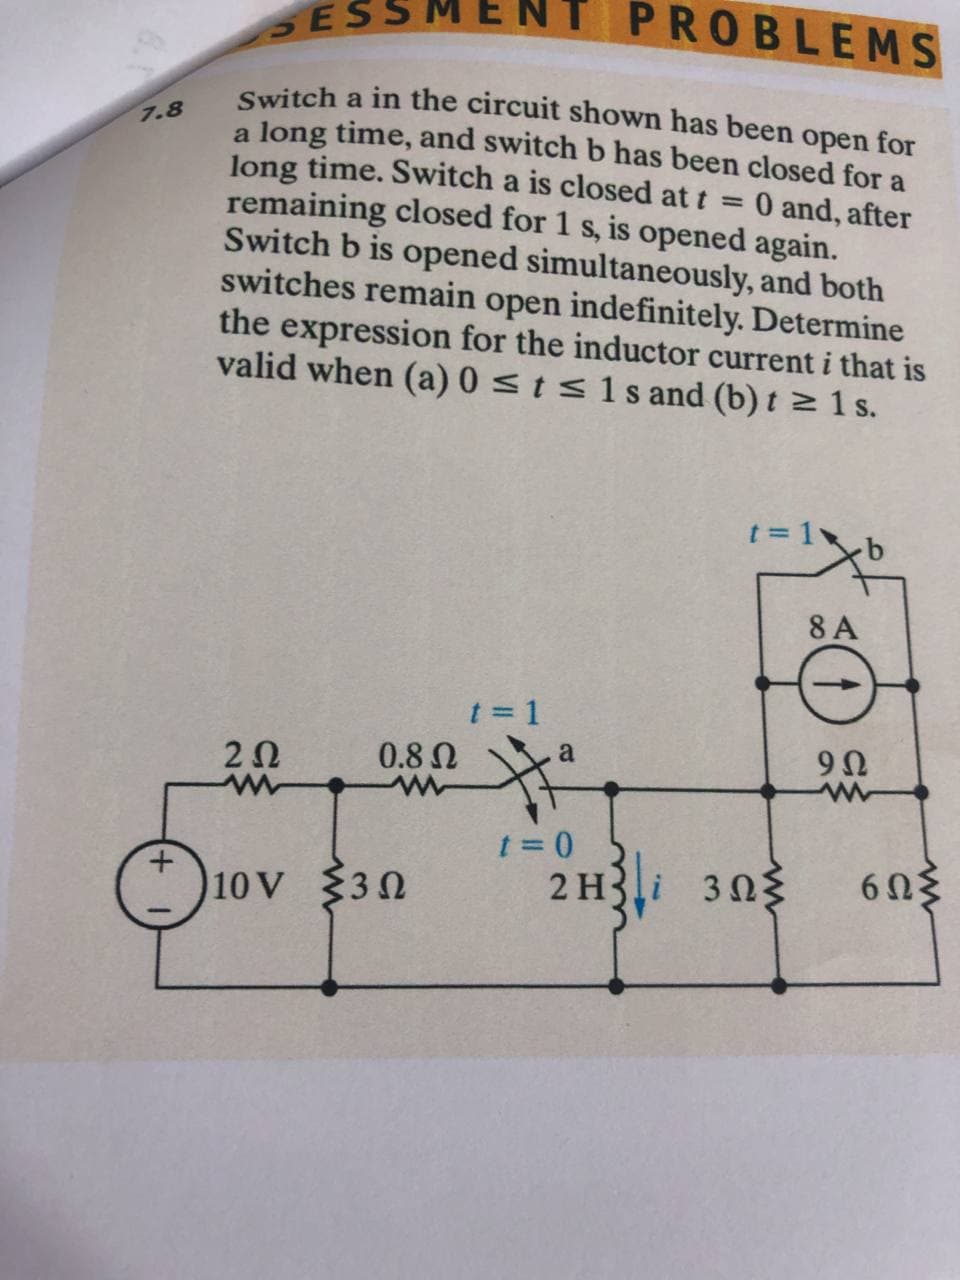 NT PROBLEMS
SESSN
Switch a in the circuit shown has been open for
a long time, and switch b has been closed for a
long time. Switch a is closed at t =
remaining closed for 1 s, is opened again.
Switch b is opened simultaneously, and both
switches remain open indefinitely. Determine
the expression for the inductor current i that is
valid when (a) 0 <ts1sand (b) t > 1 s.
7.8
0 and, after
t = 1
8 A
t = 1
2Ω
0.8N
a
10V 30
2 H3i 303
6Ωξ
